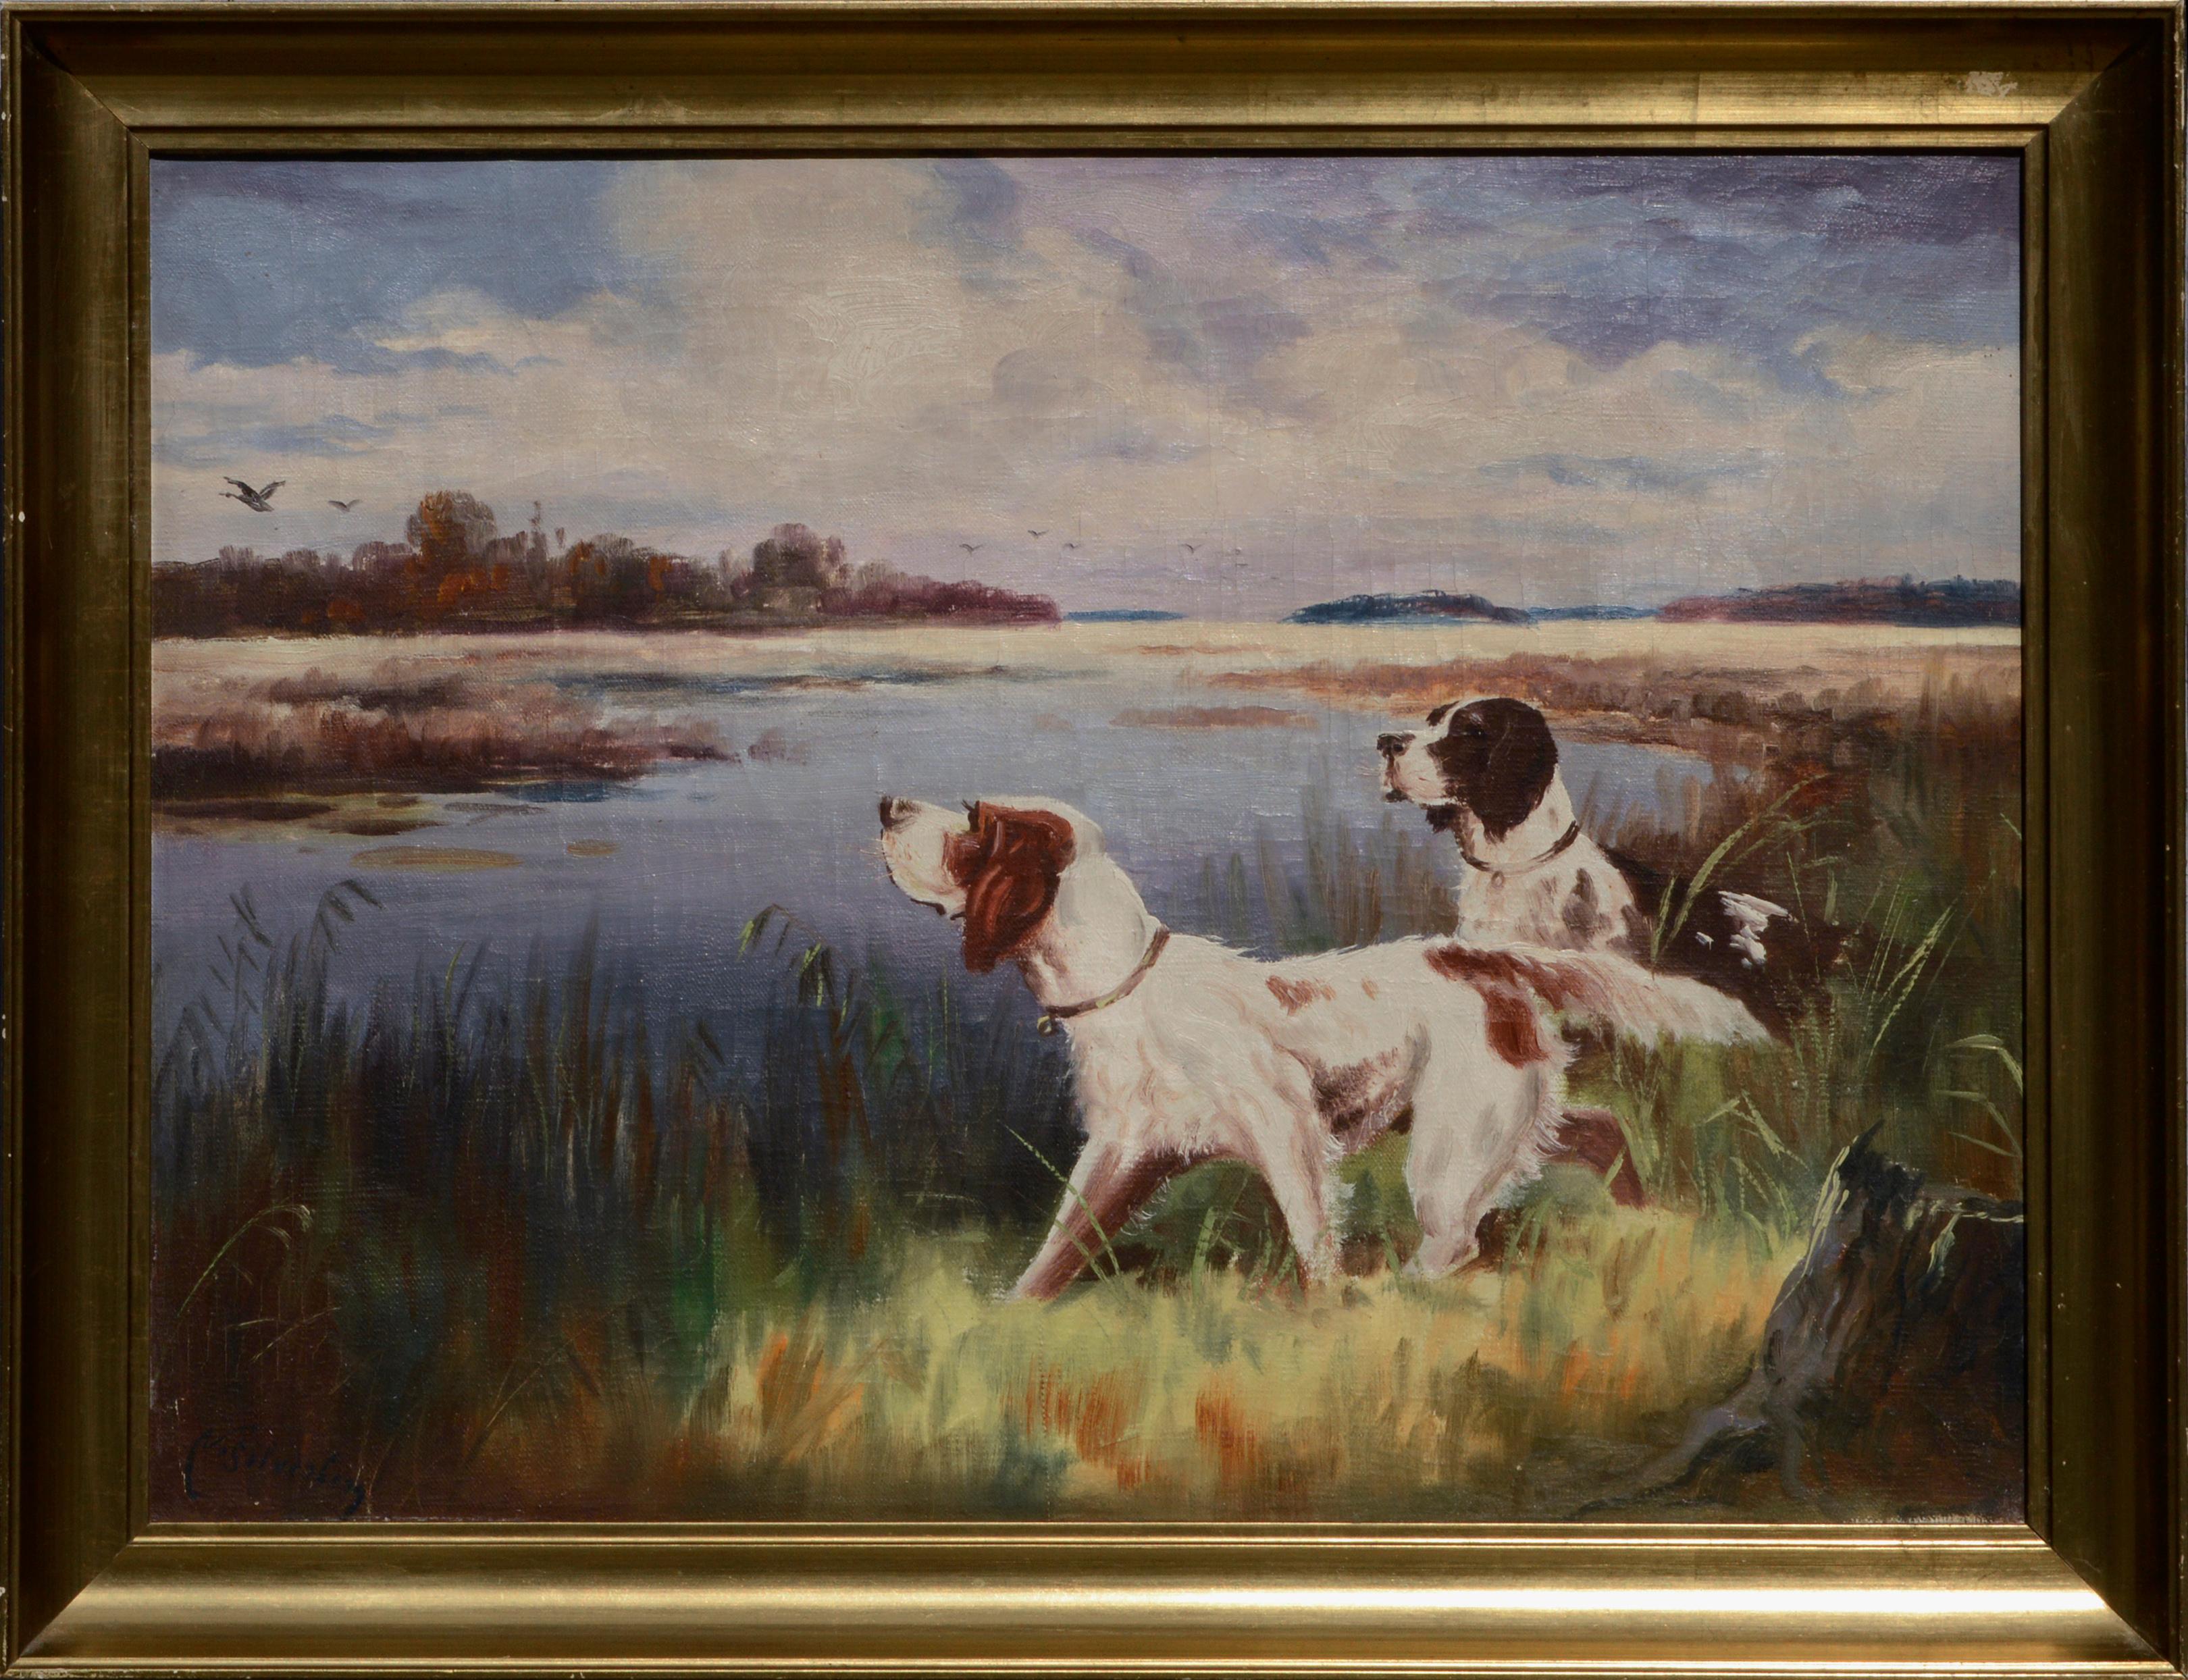 Nikolai Silverberg Landscape Painting - Hunting Dogs by the Lake - Landscape